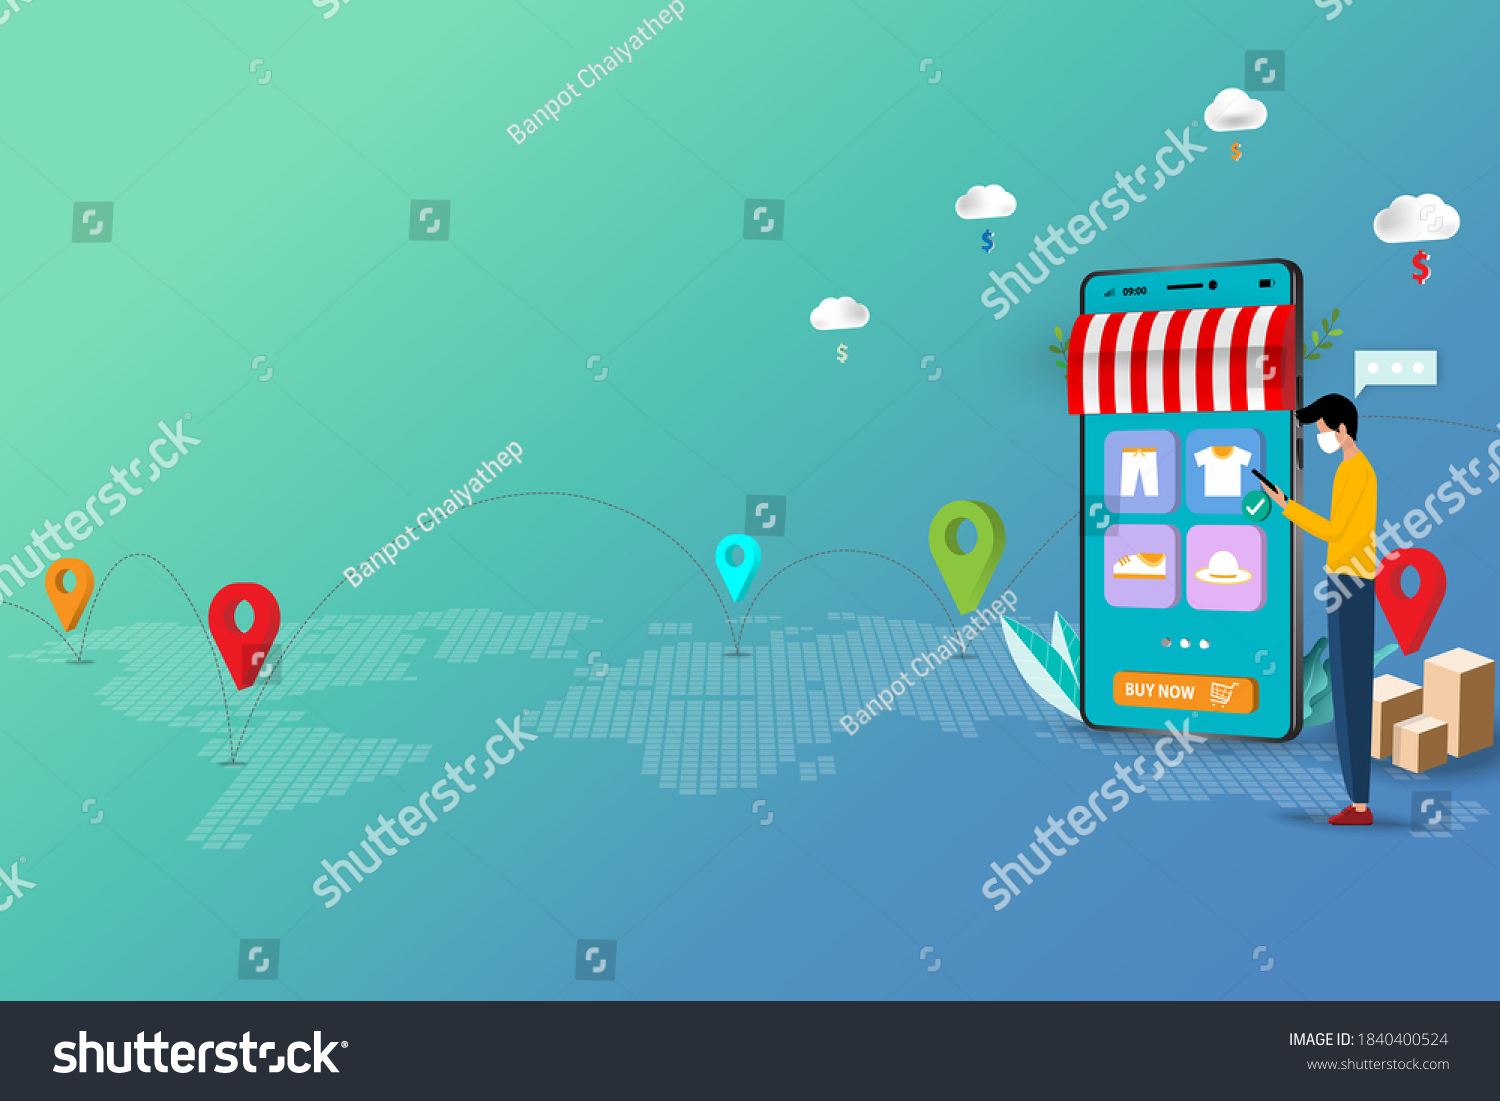 Concept of online shopping, young man standing and hold a smart phone that the display contain app icon of products list to order a new shirt in blue green shade color background . Vector 3D design. #1840400524